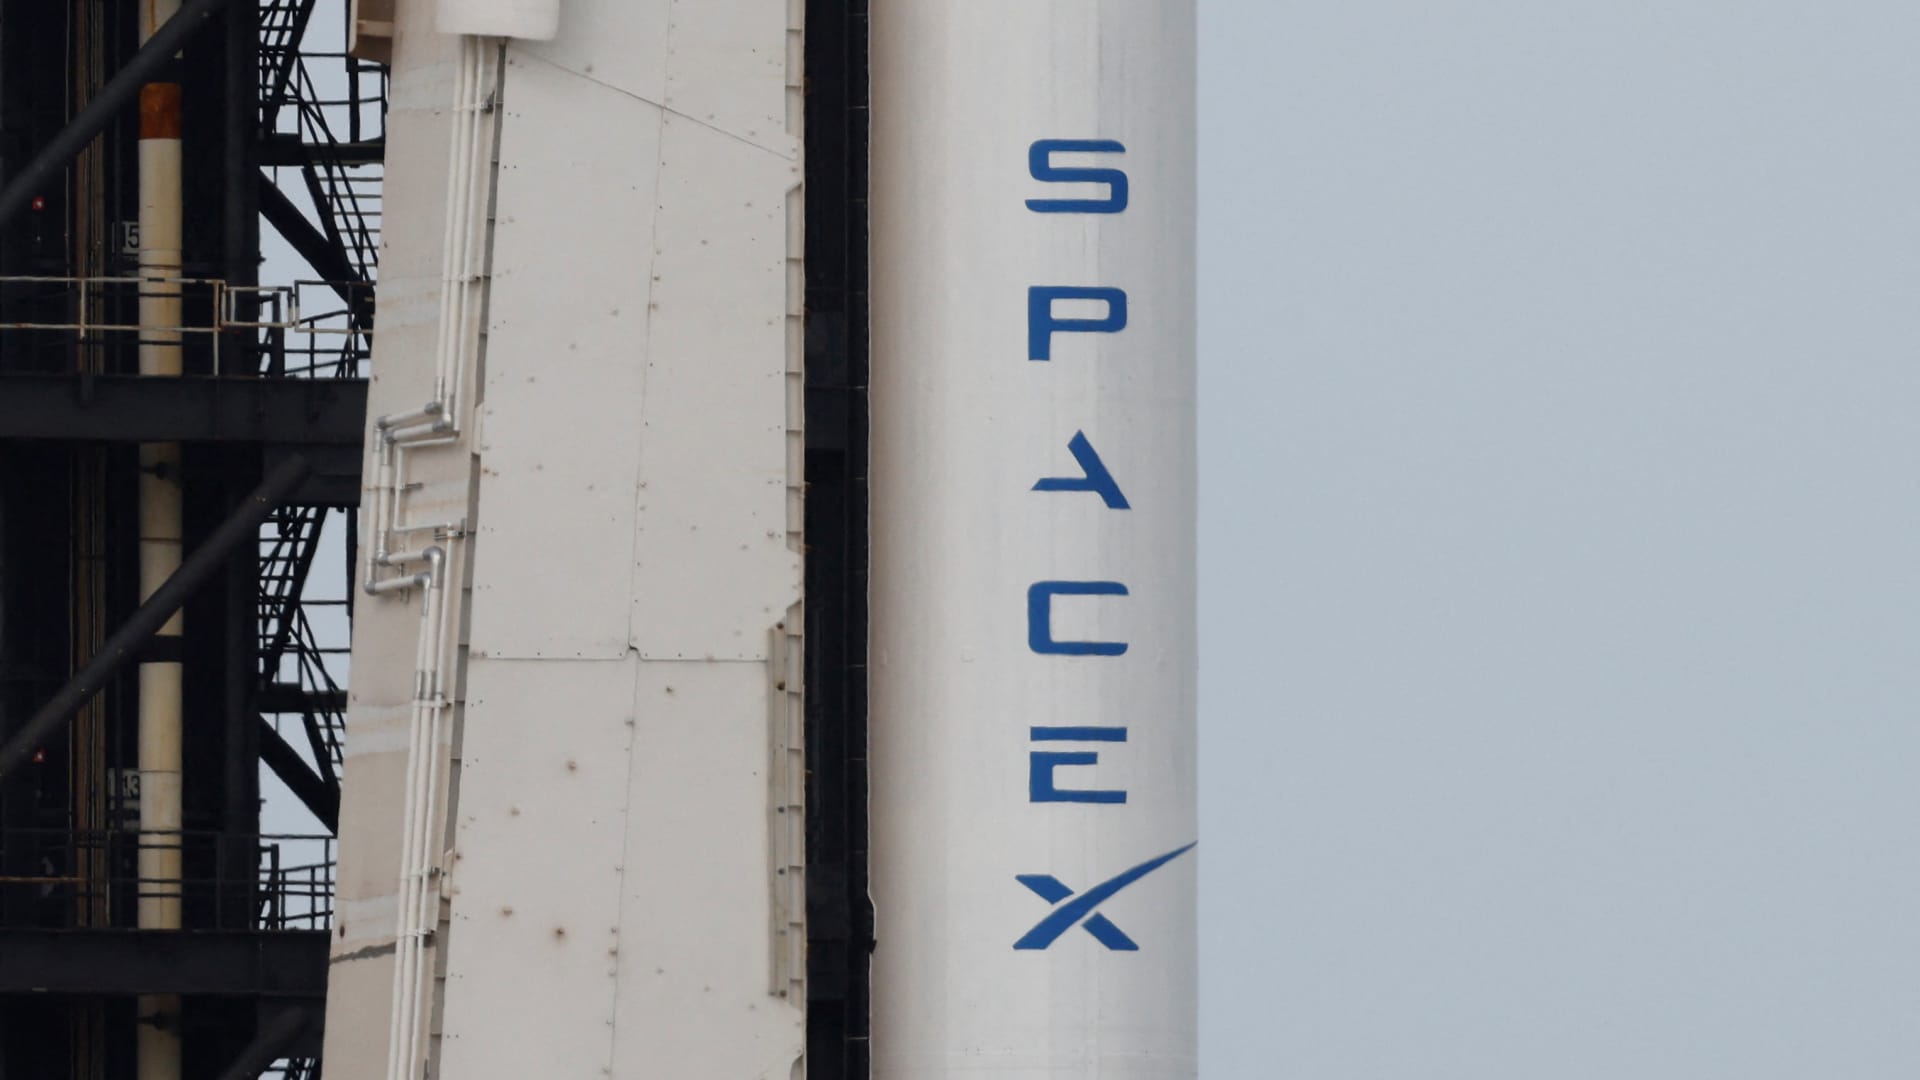 SpaceX hit with new NLRB complaint over severance agreements, dispute resolution rules Auto Recent